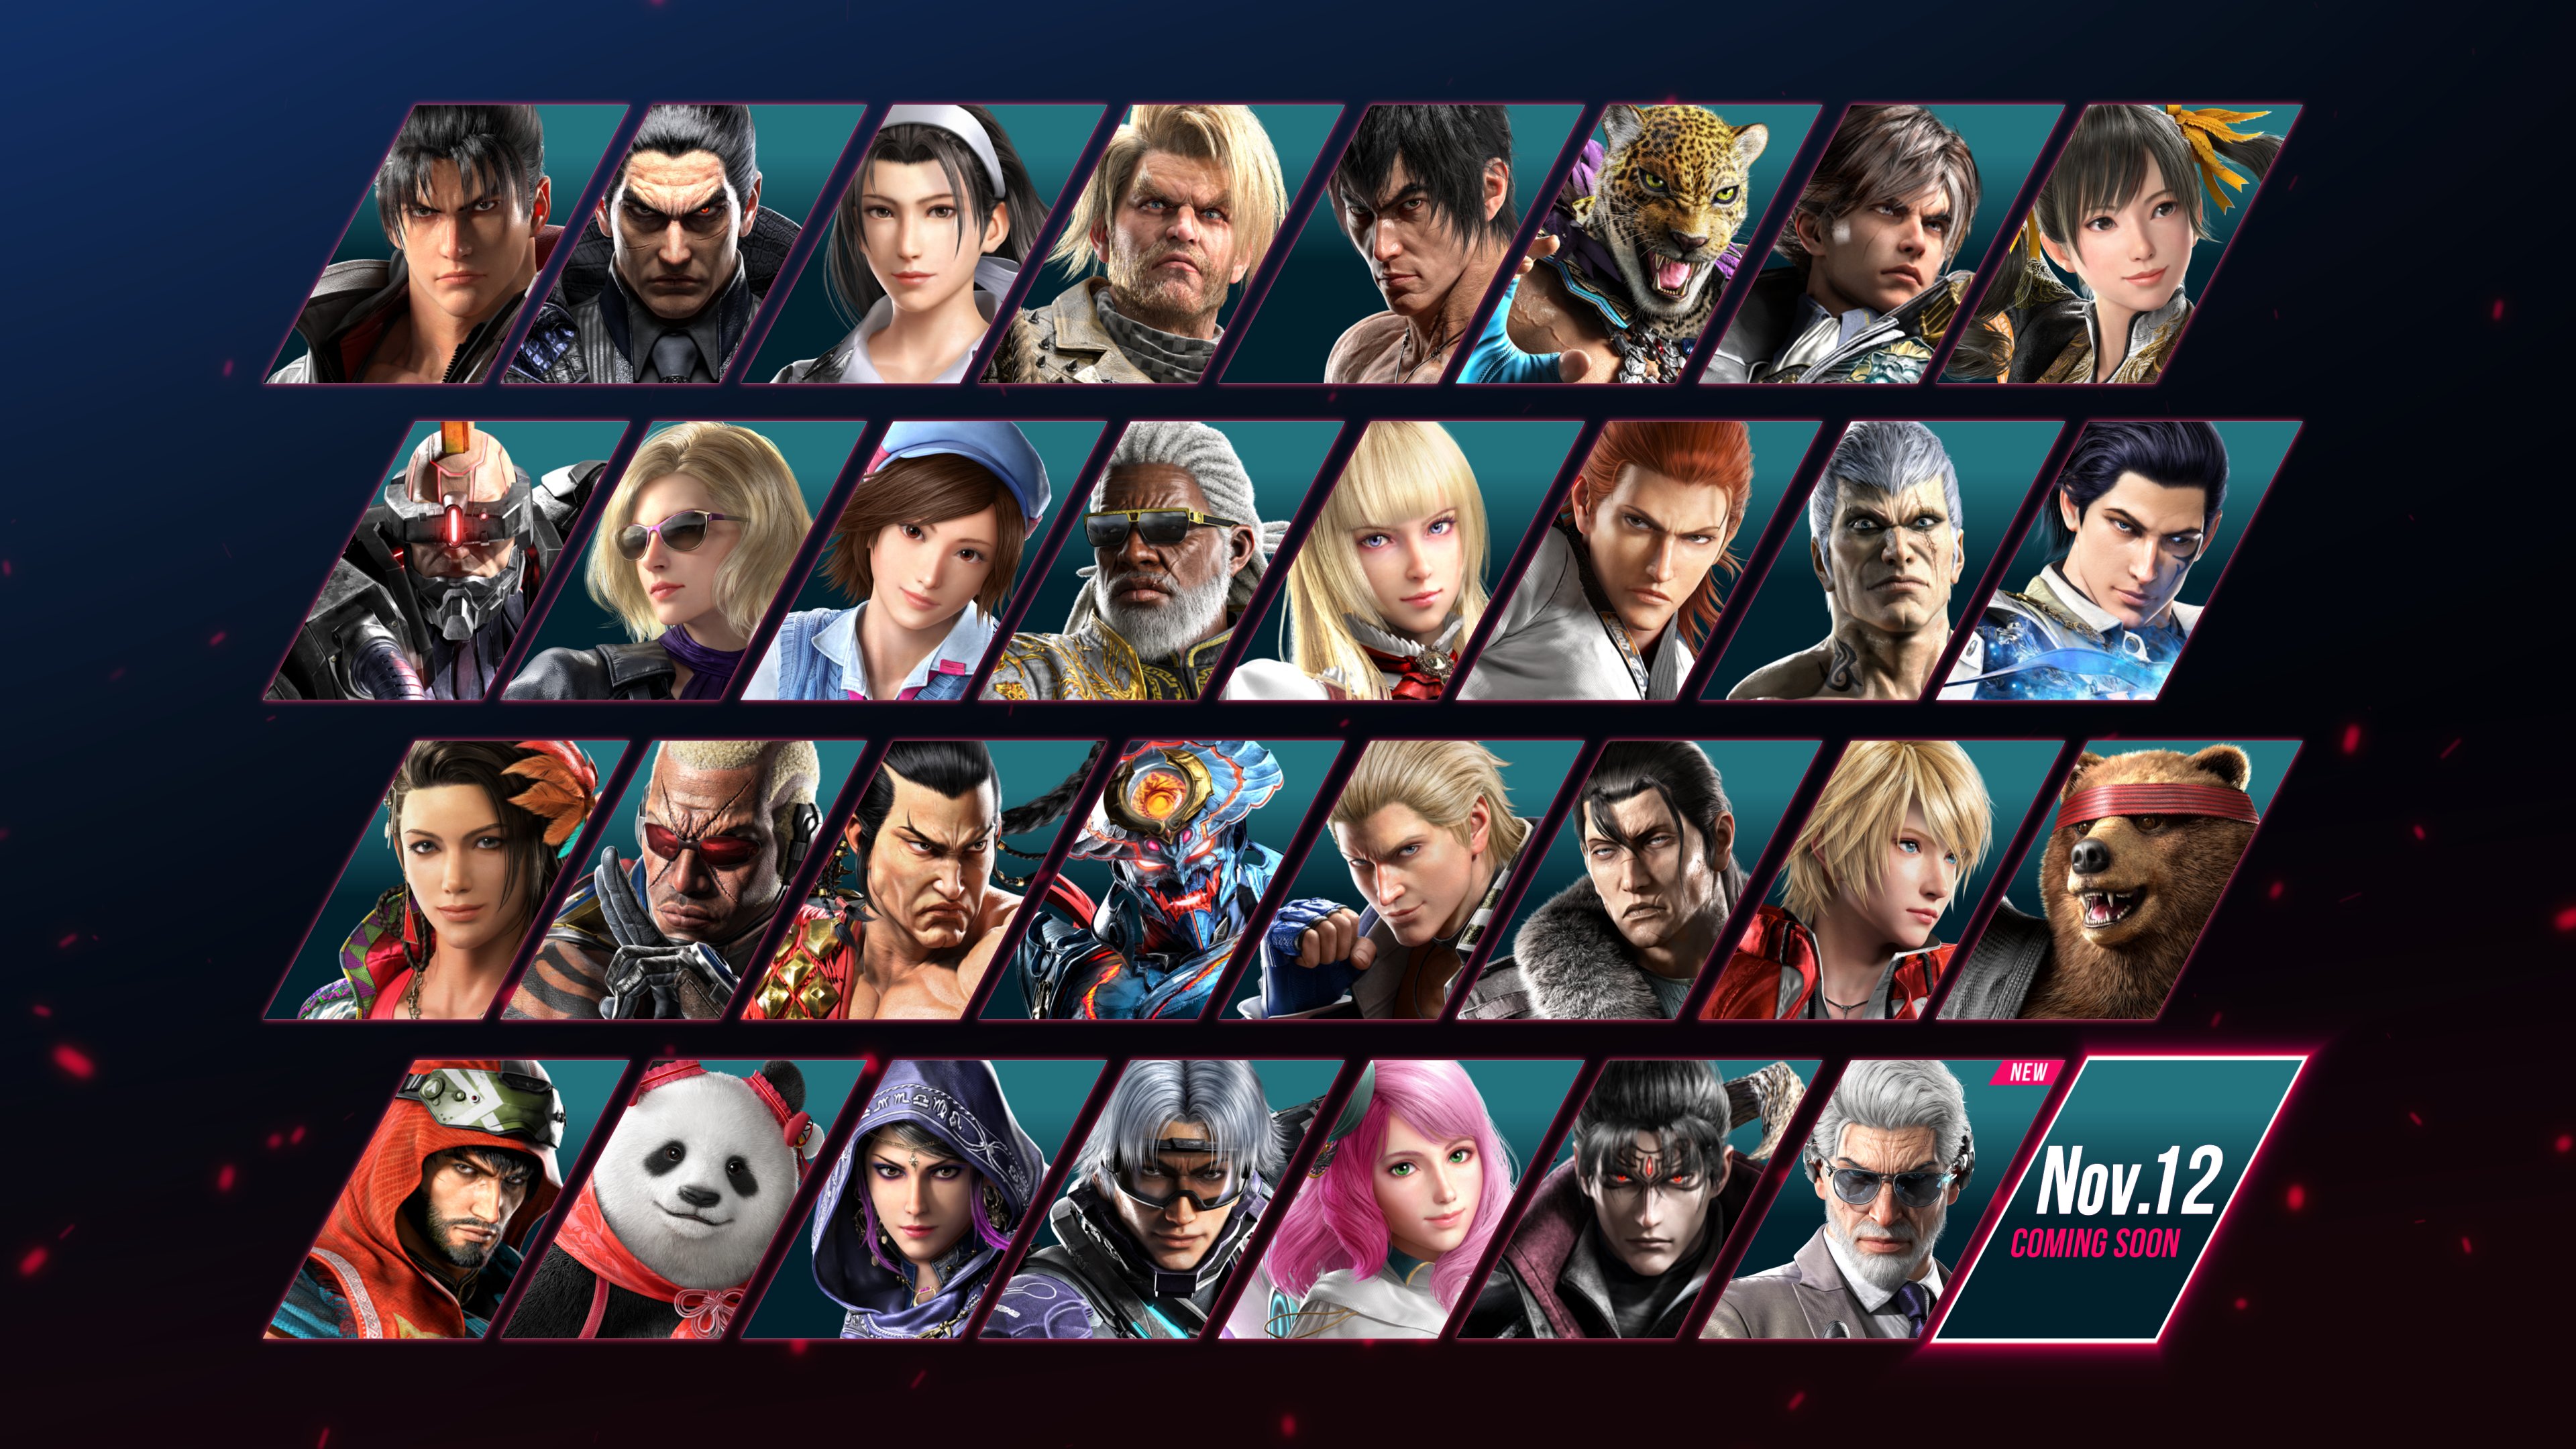 TEKKEN on X: Today at 5:00pm PST! 🥊A Special #TEKKEN8 Exhibition Match  with all of the Tekken 7 @EVO champions 🥊TWT 2023 + Tekken 8 updates 🥊The  32nd and final character will